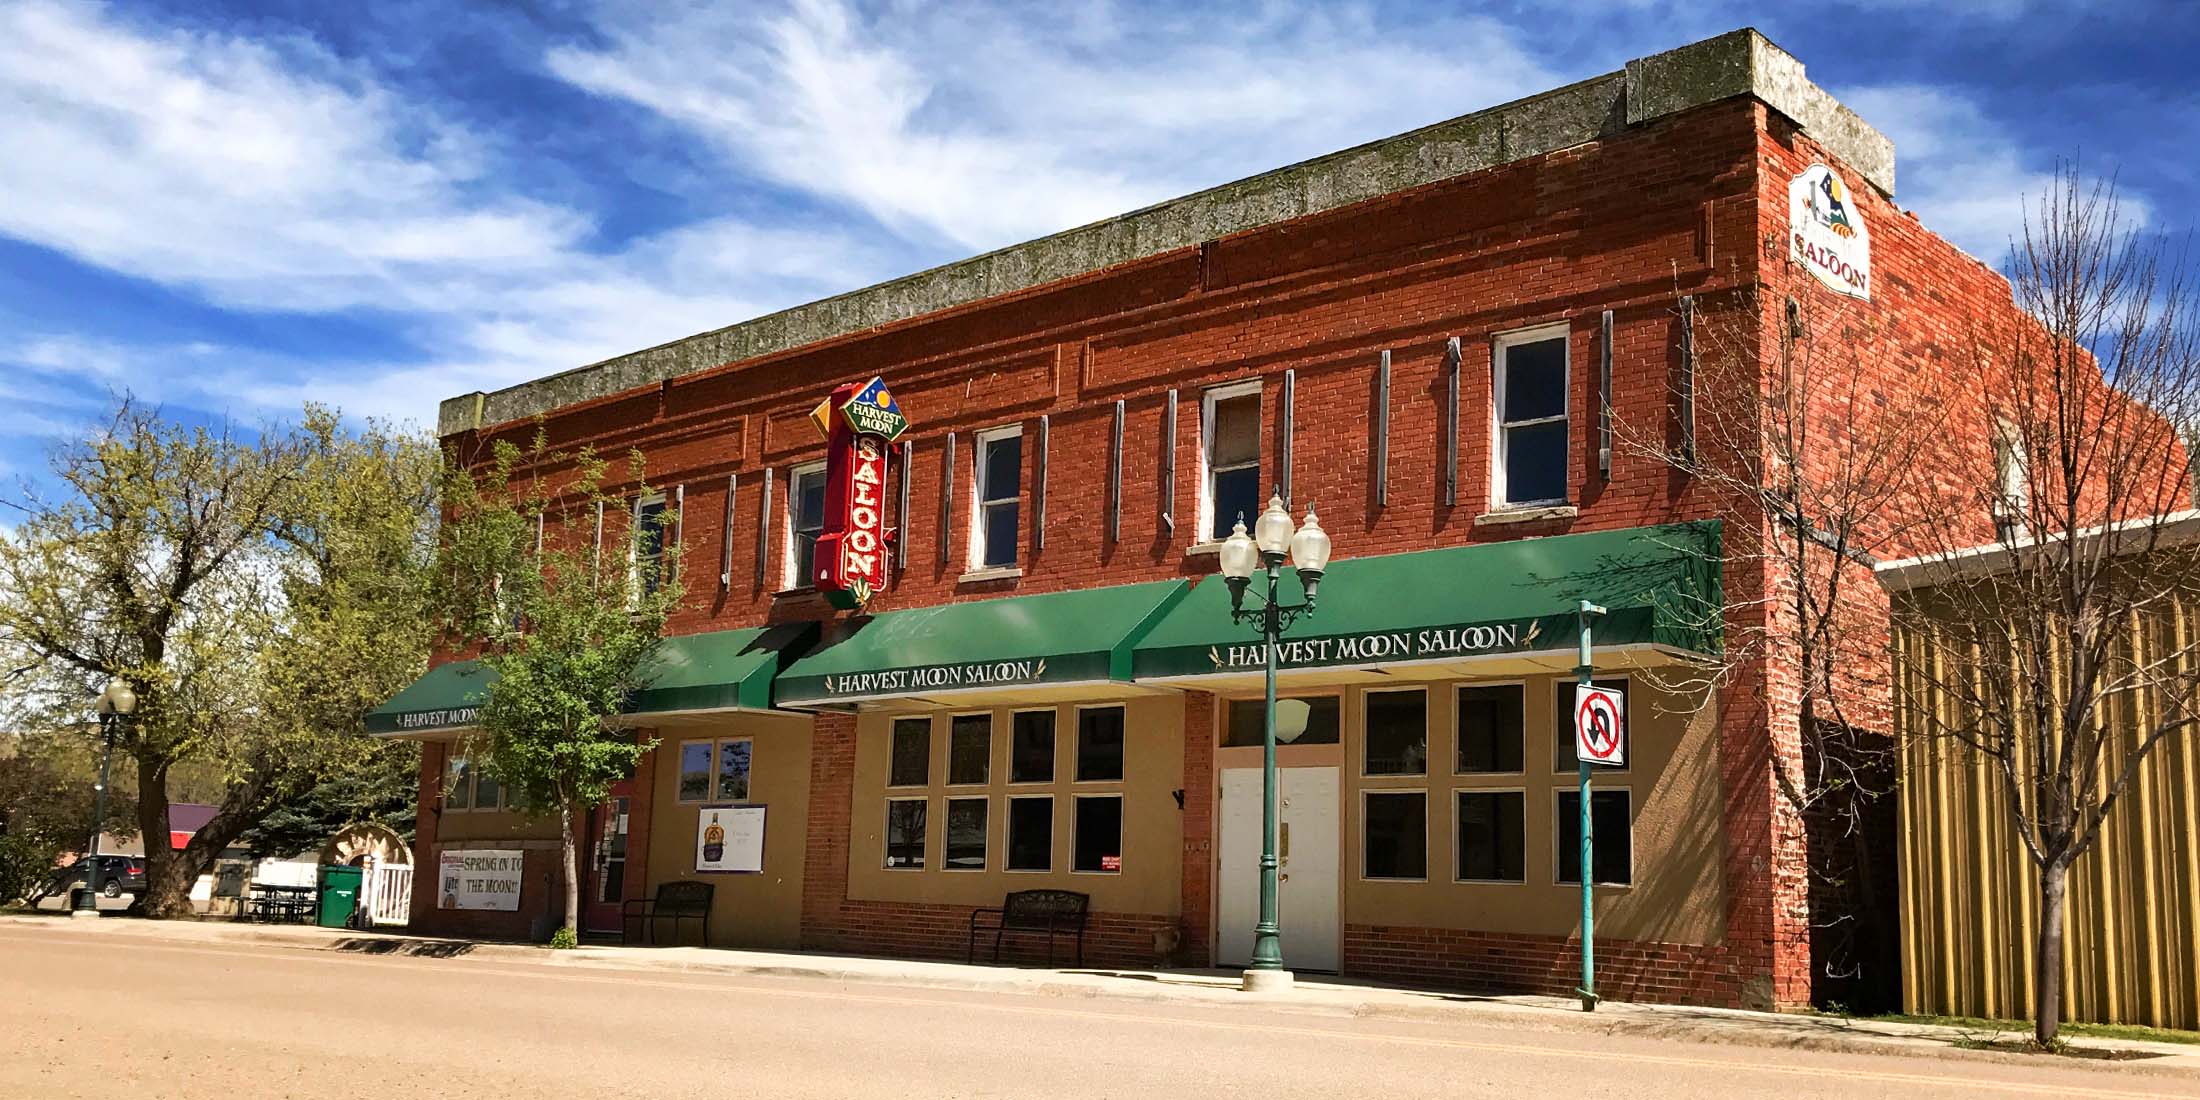 Award Winning brews are served at the Harvest Moon Saloon, located in downtown Belt, Montana - Cascade County.